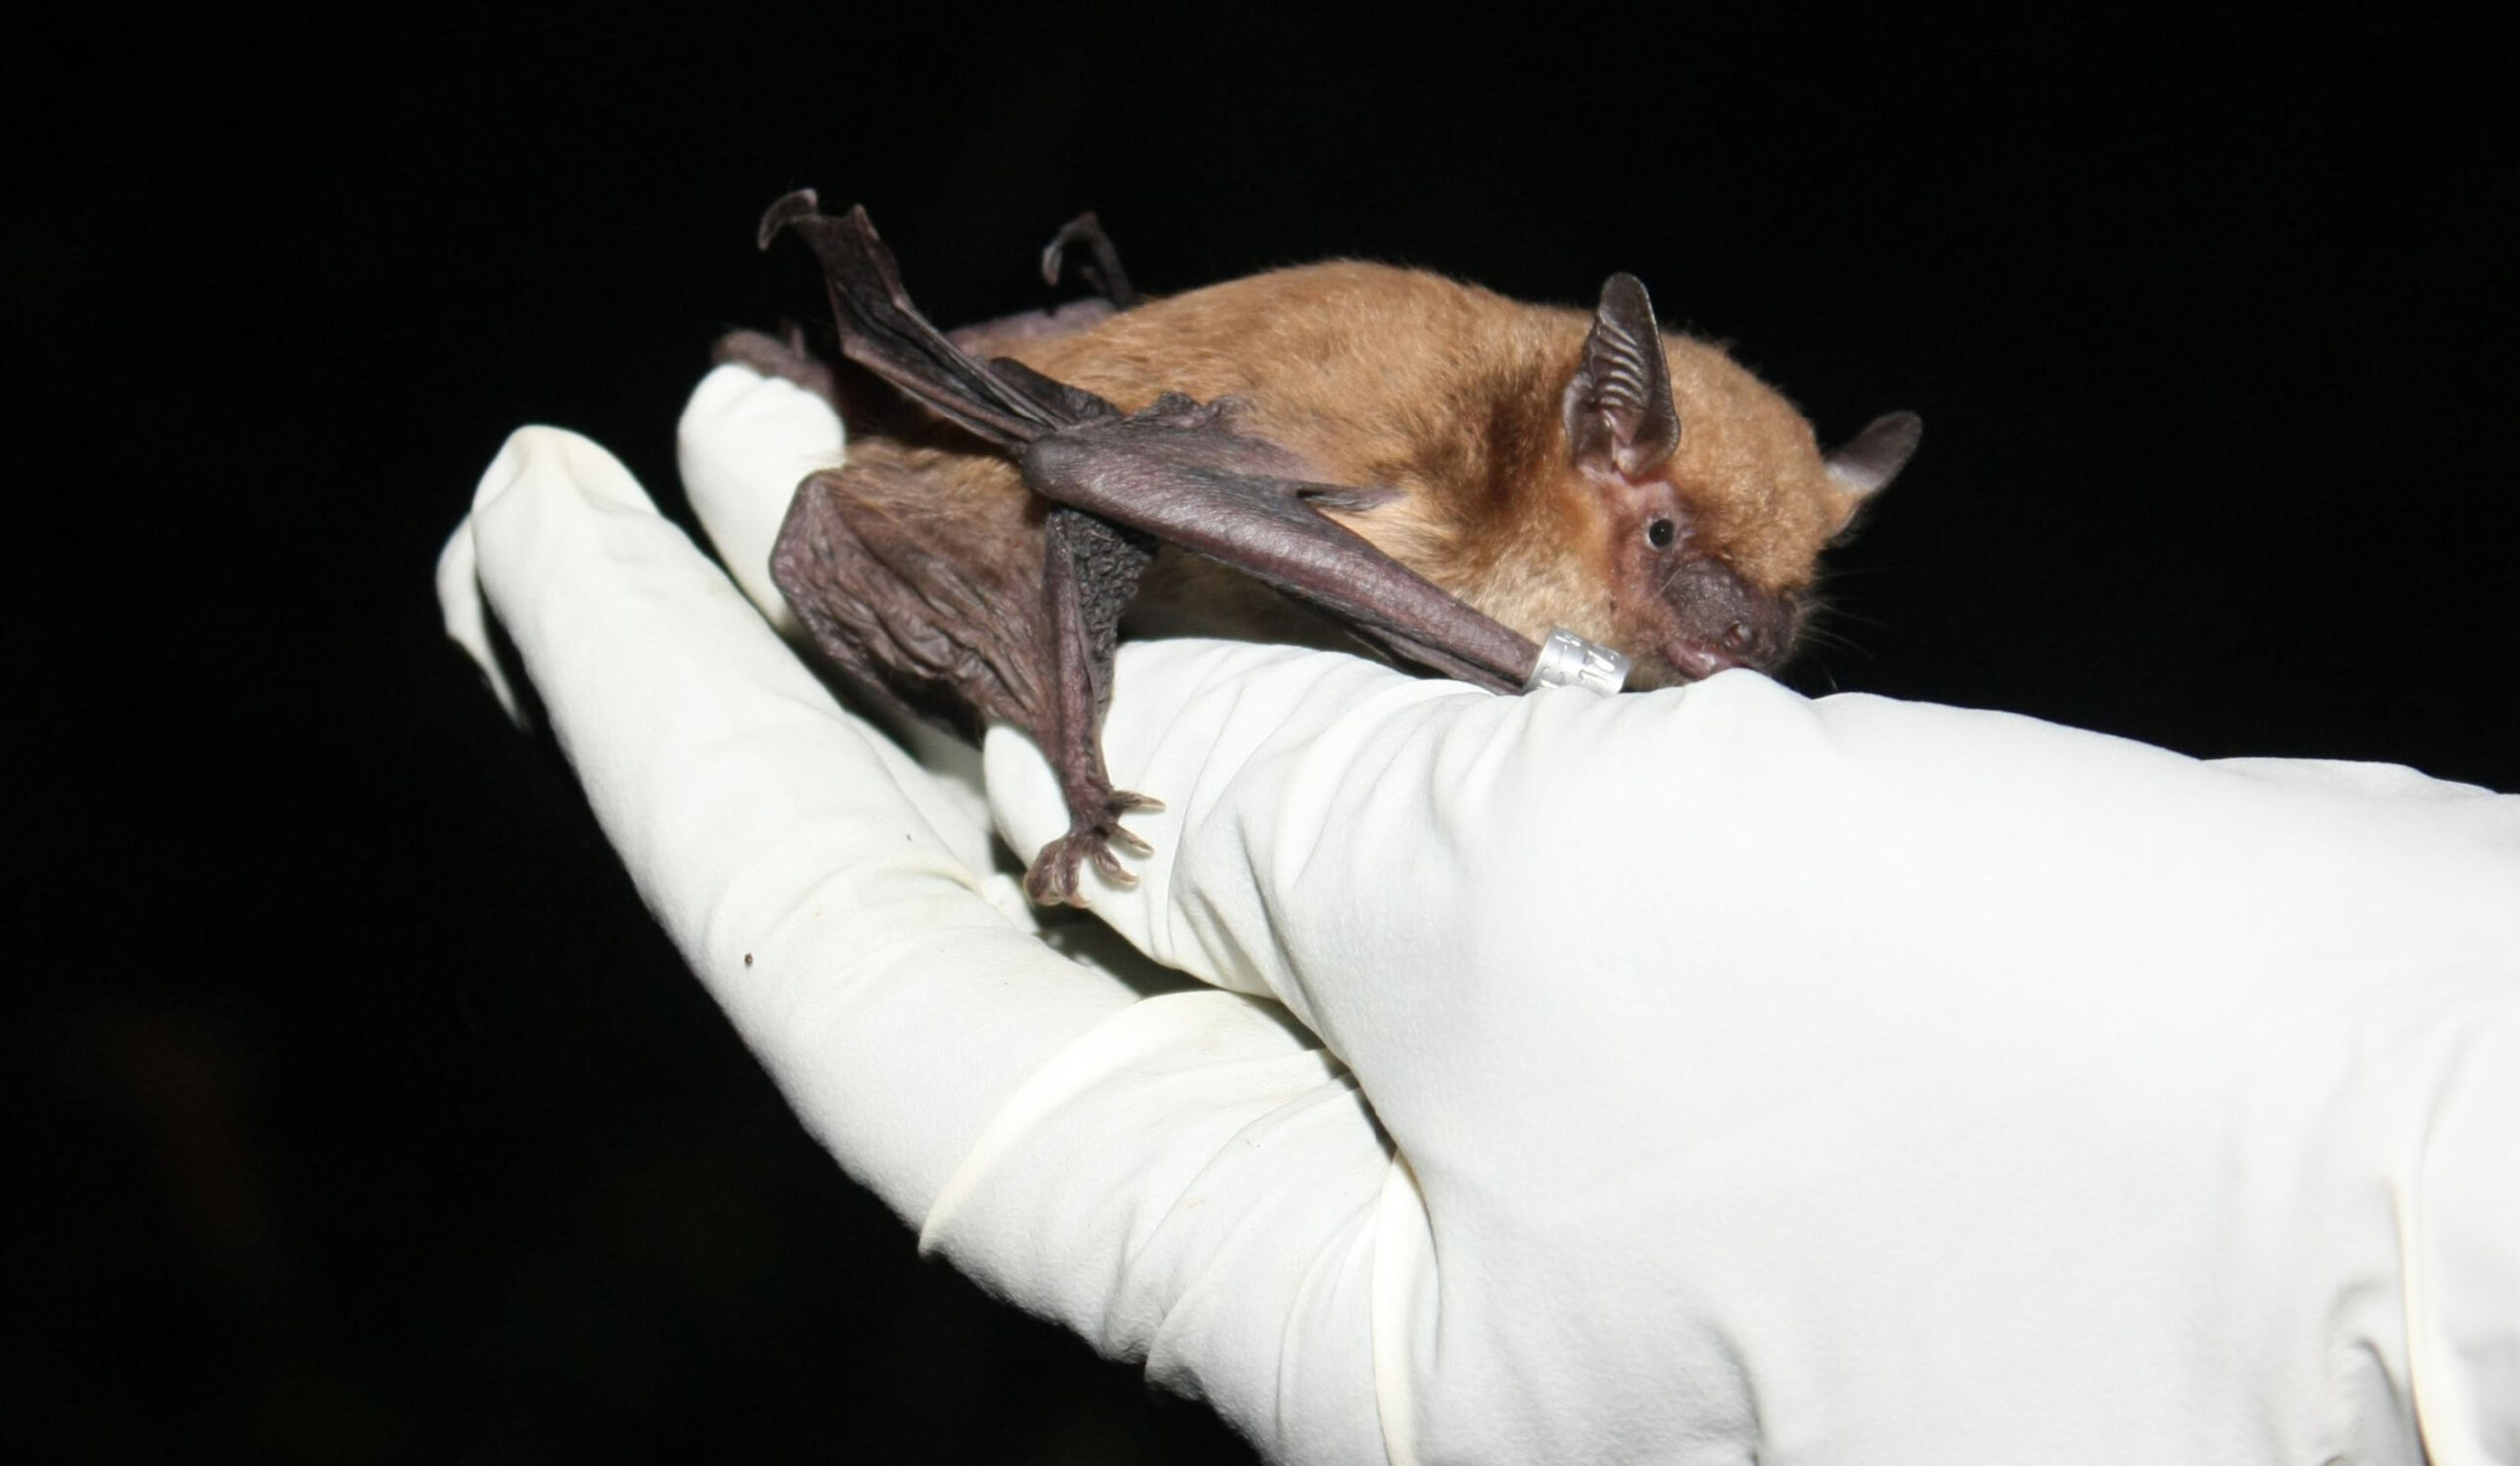 Tri-colored bat resting in the palm of a human hand